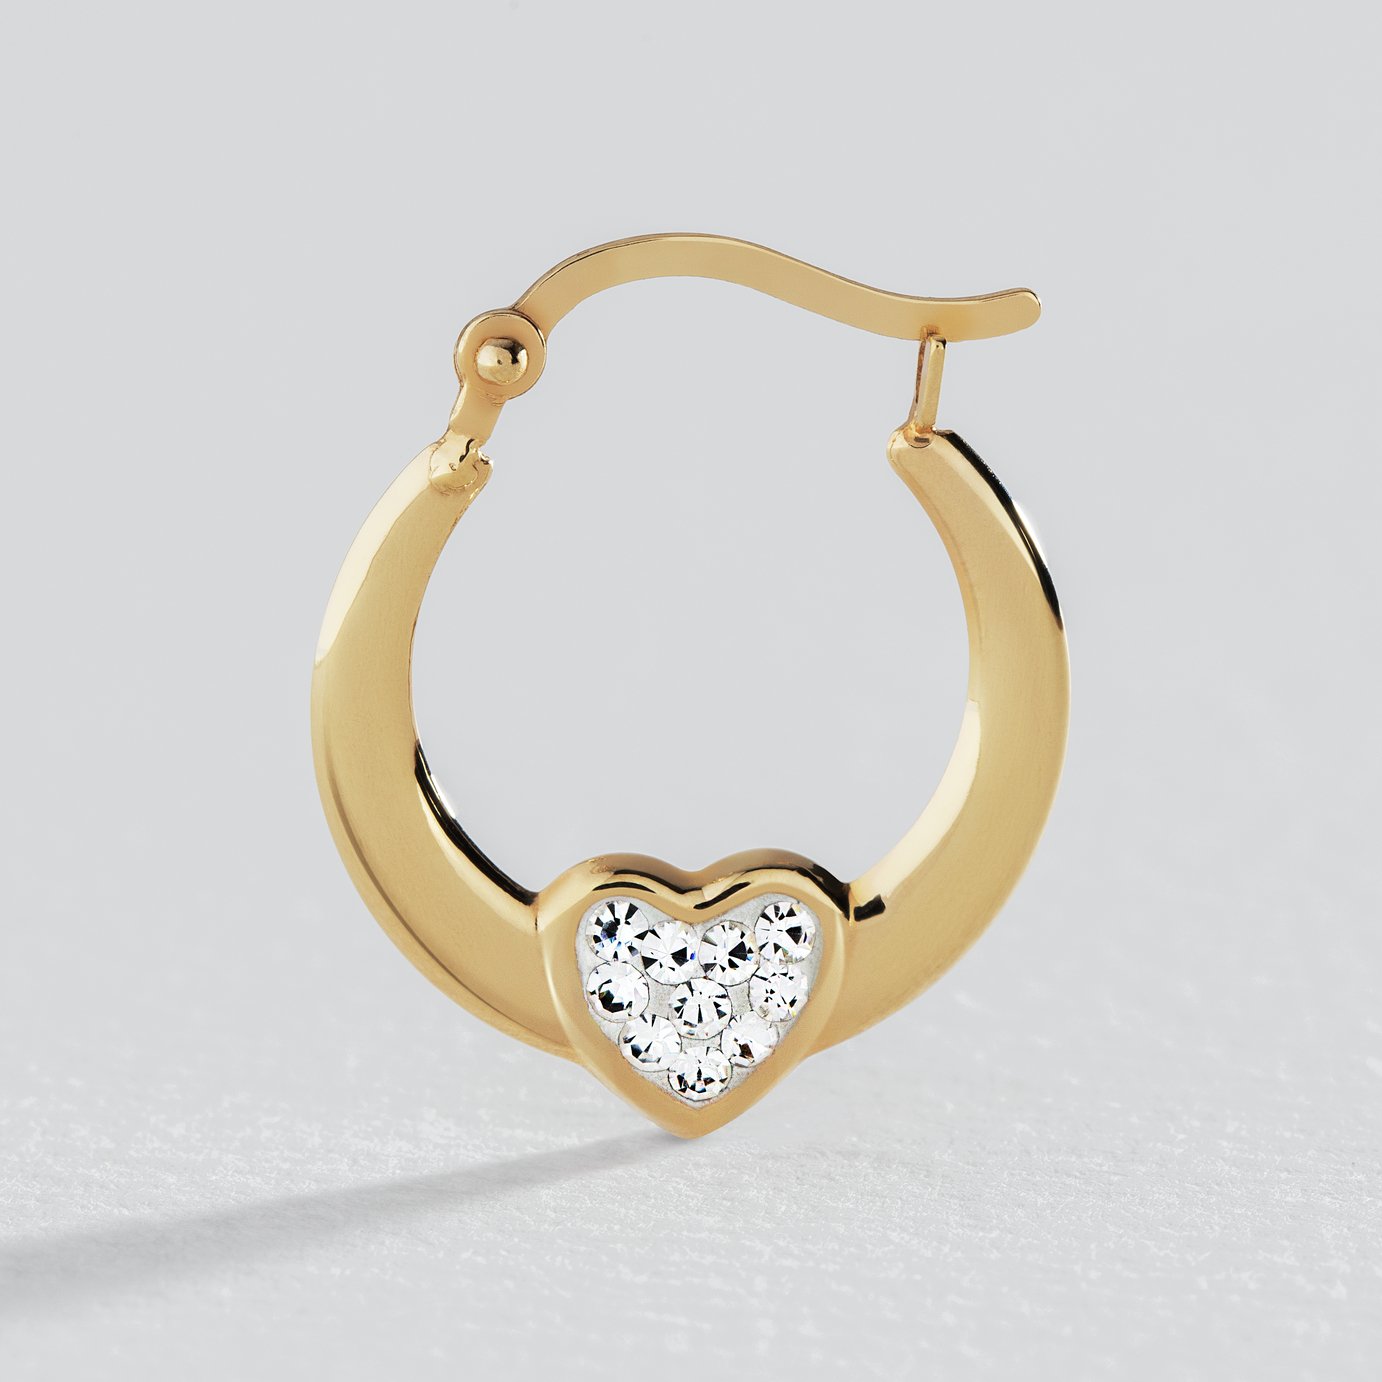 Revere 9ct Gold Reversible Crystal Heart Creole Earrings